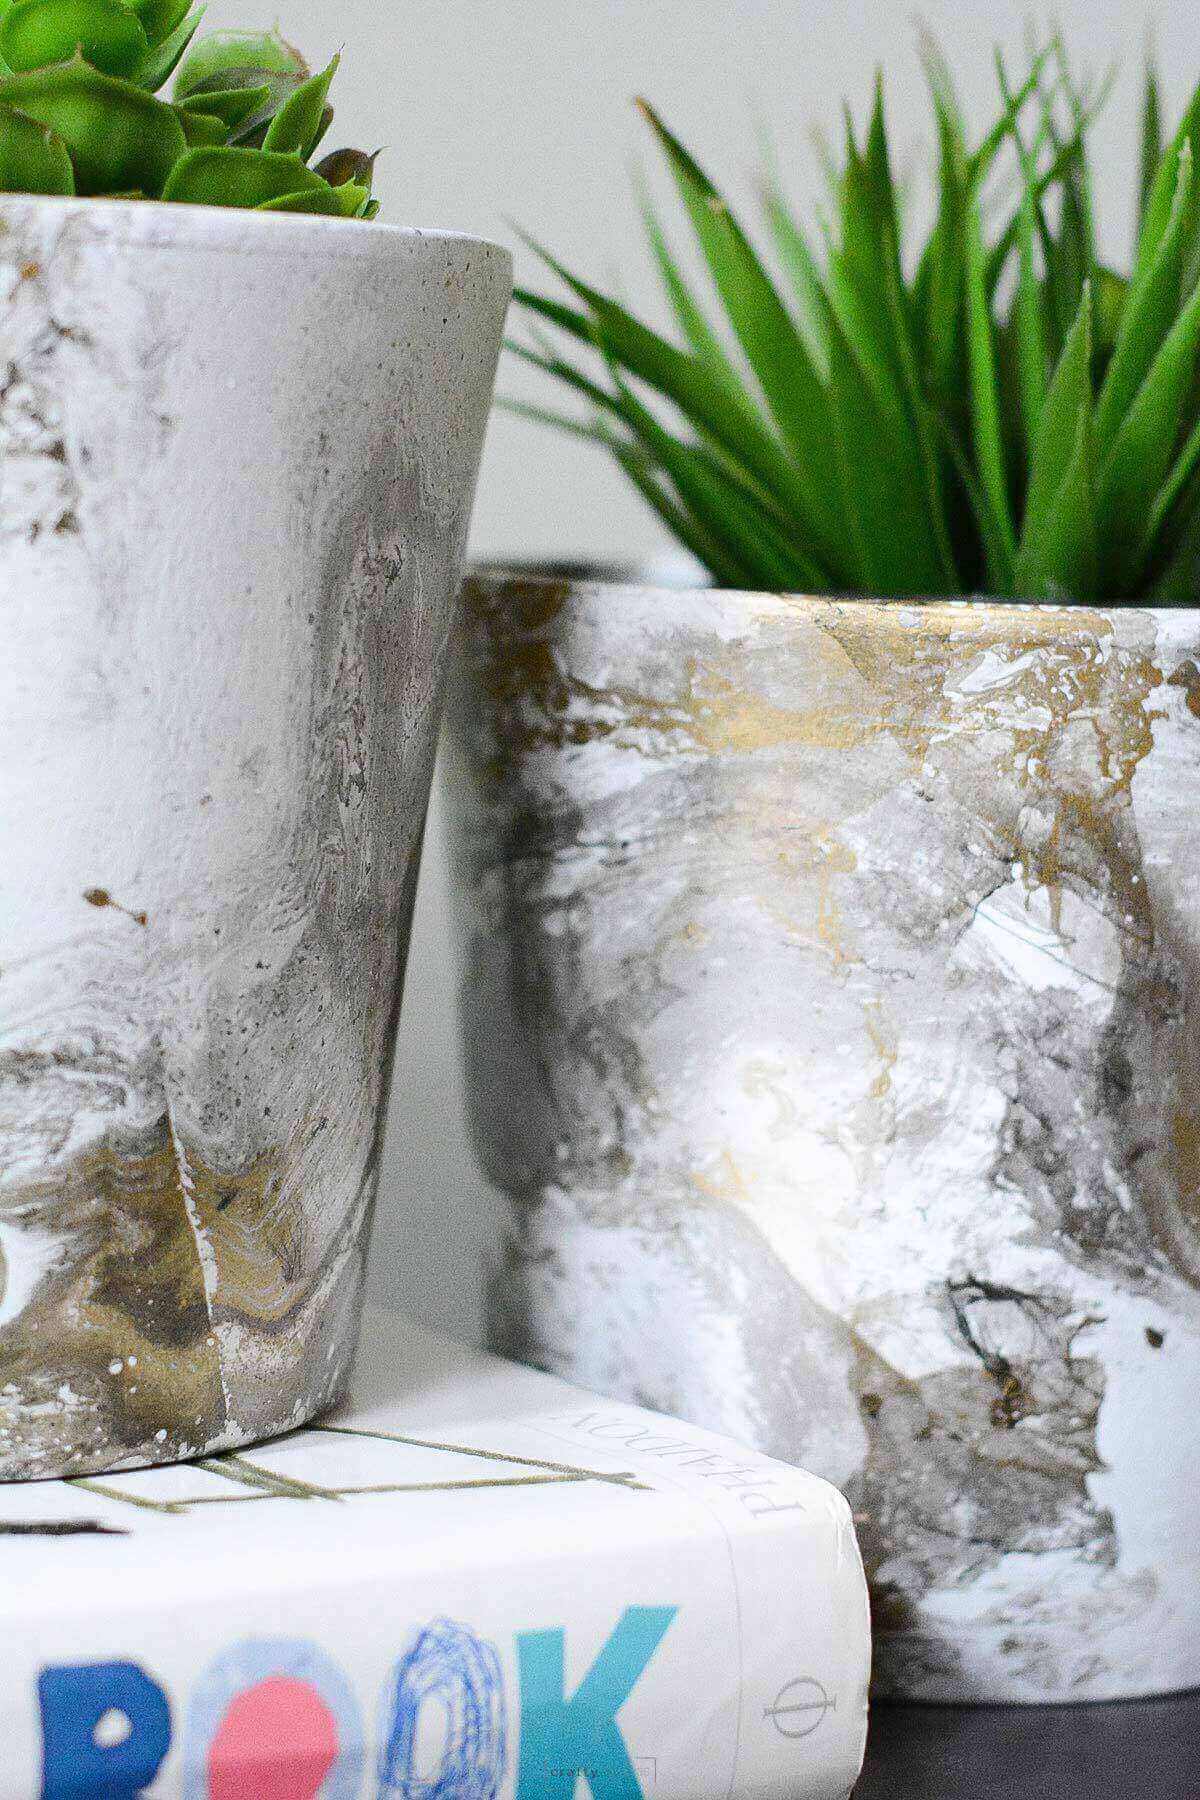 marbled flower pots done with spray paint.